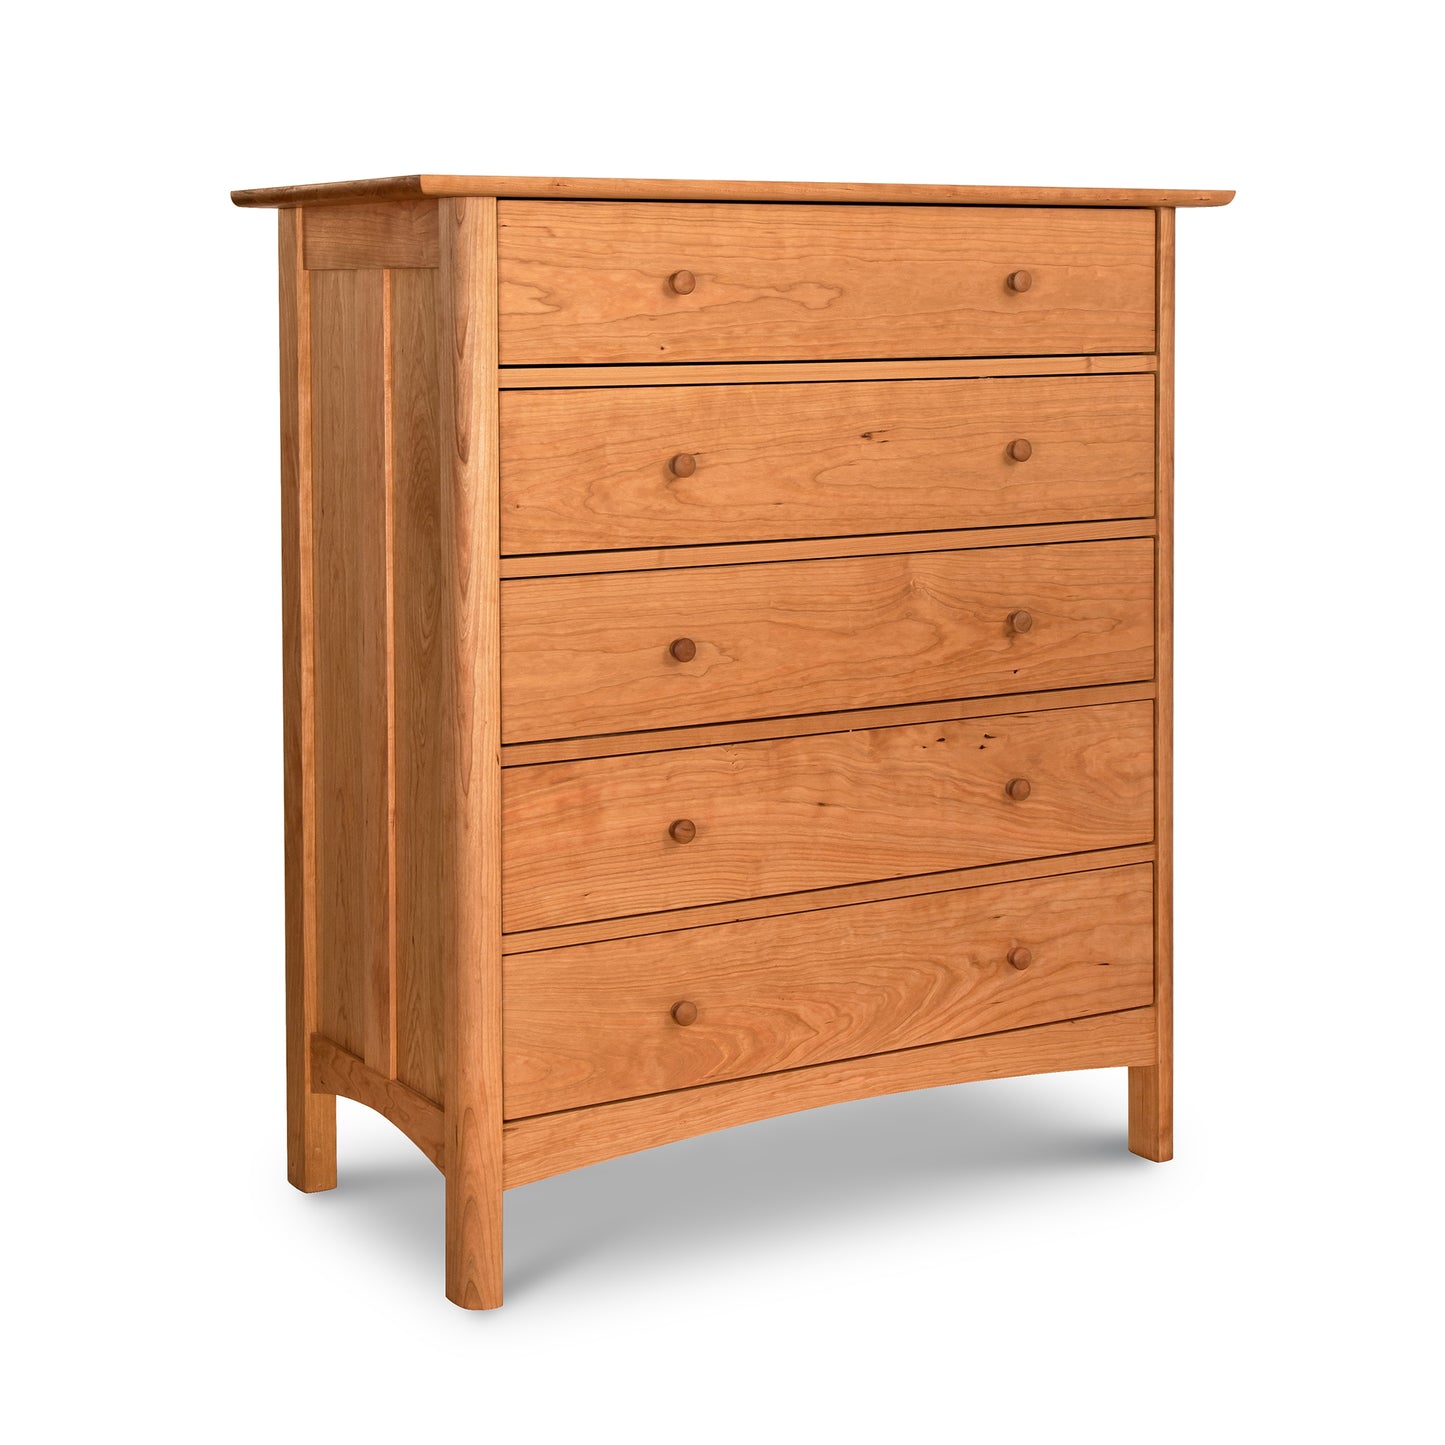 A Heartwood Shaker 5-Drawer Chest by Vermont Furniture Designs on a white background.